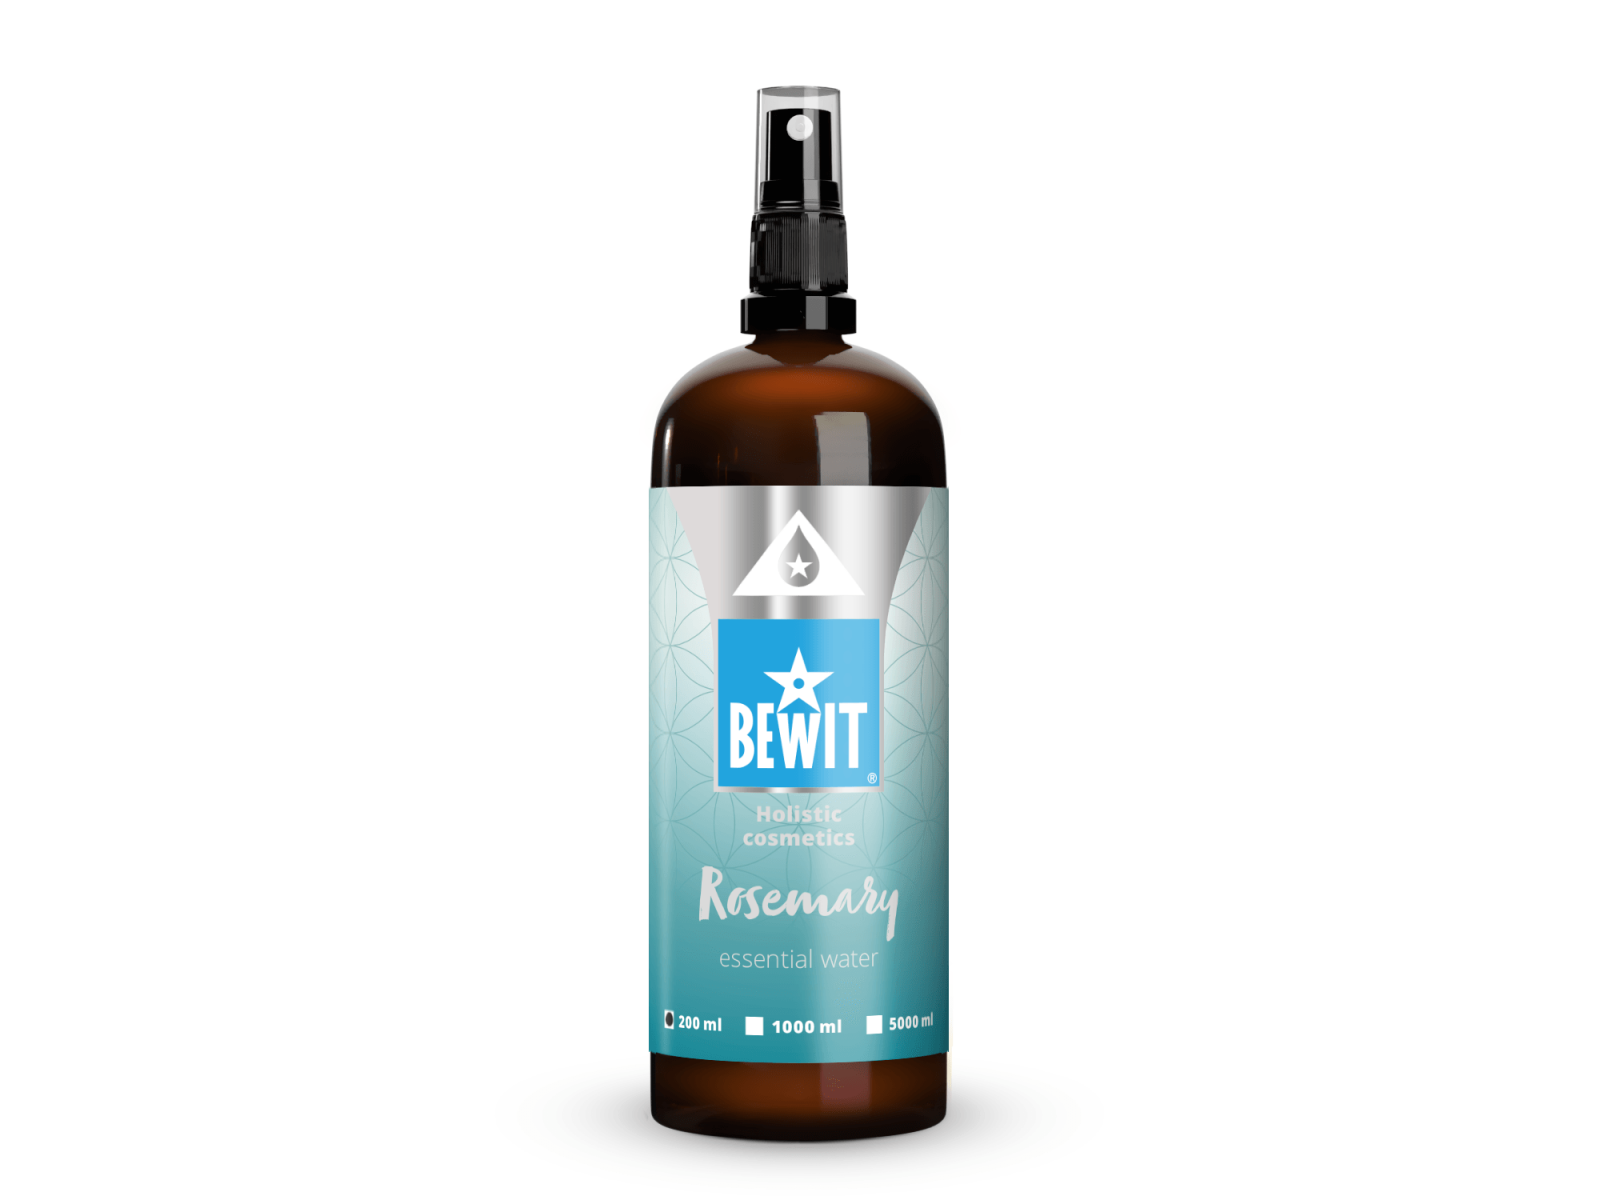 BEWIT Rosemary essential water - 100% NATURAL HYDROLYTE - 2